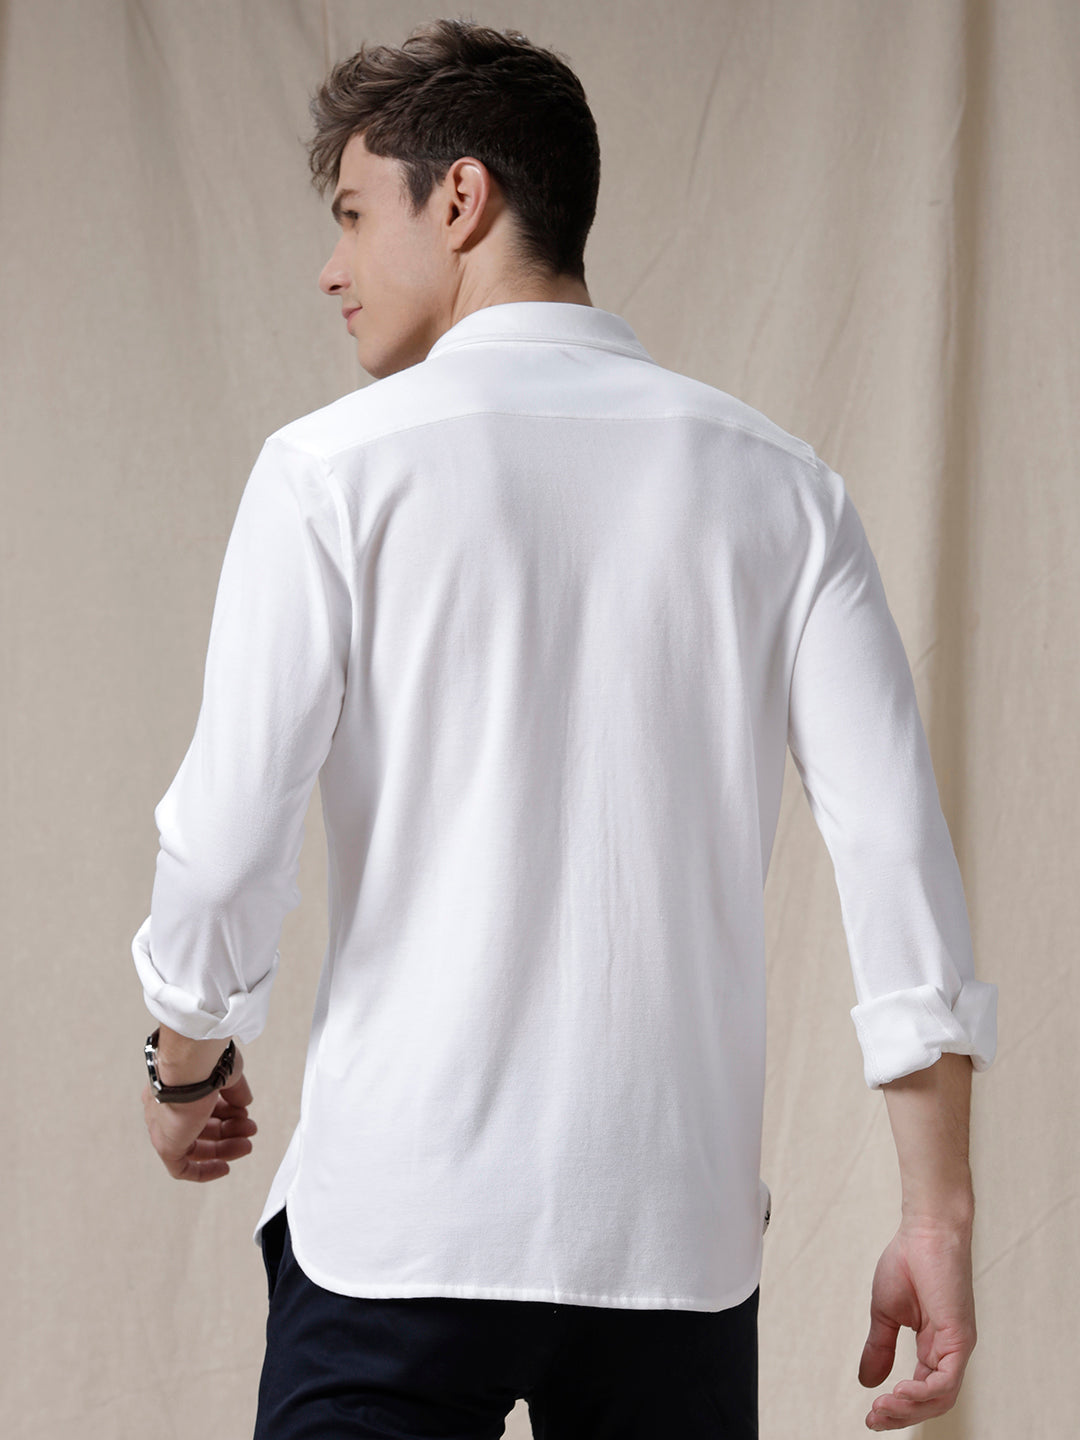 Solid Knit Prime White Shirt